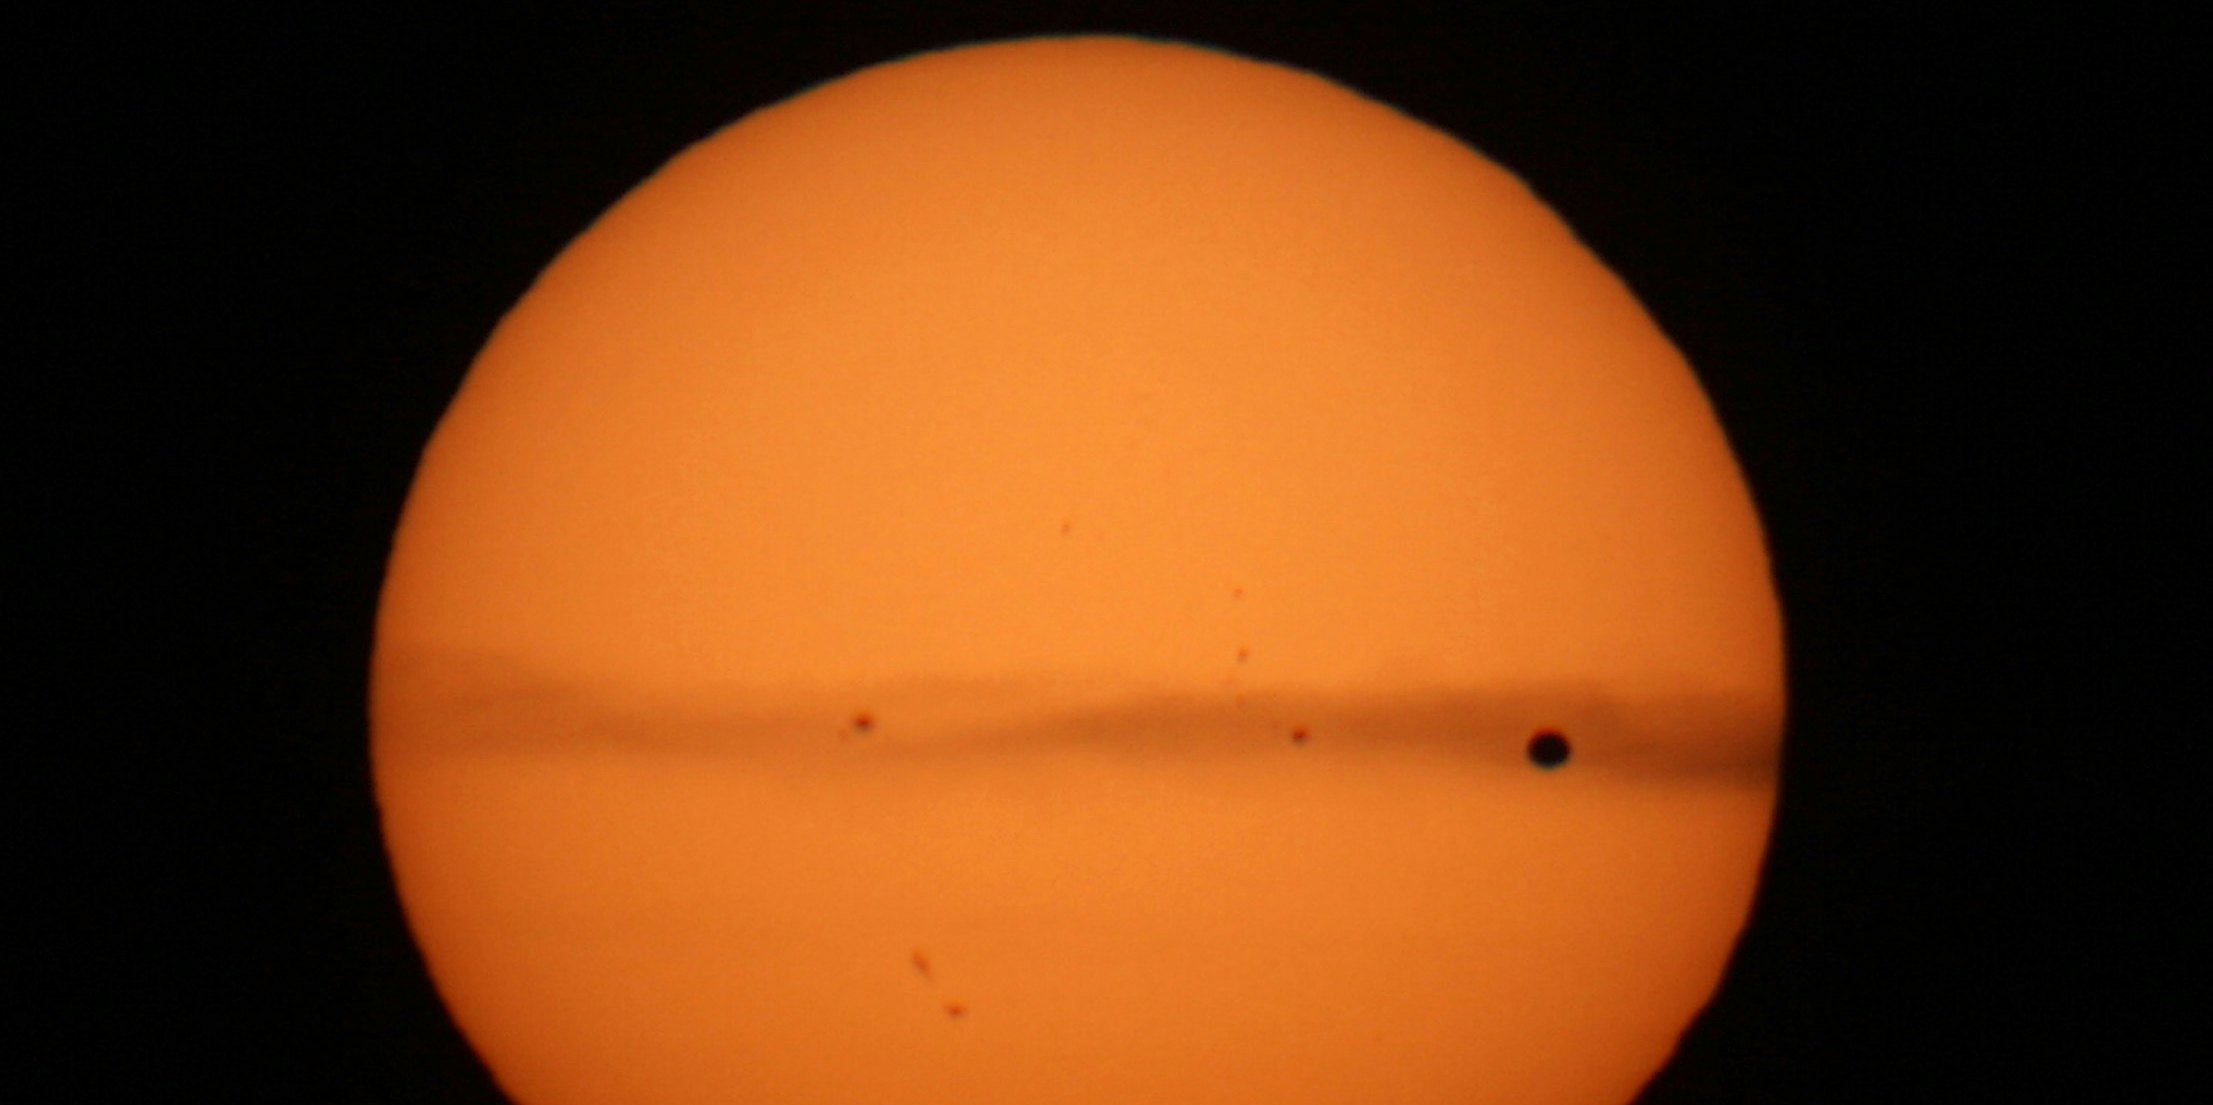 The planet Venus passes before the sun, a very rarely-seen event, on June 5, 2012 near Orange, California. The transit of Venus involves the planet Venus crossing in front of the sun. The last time it was seen in California was 1882 and the next pair of events will not happen again until the year 2117 and 2125. The transit of Venus across the sun has been seen only seven times since the telescope was invented.